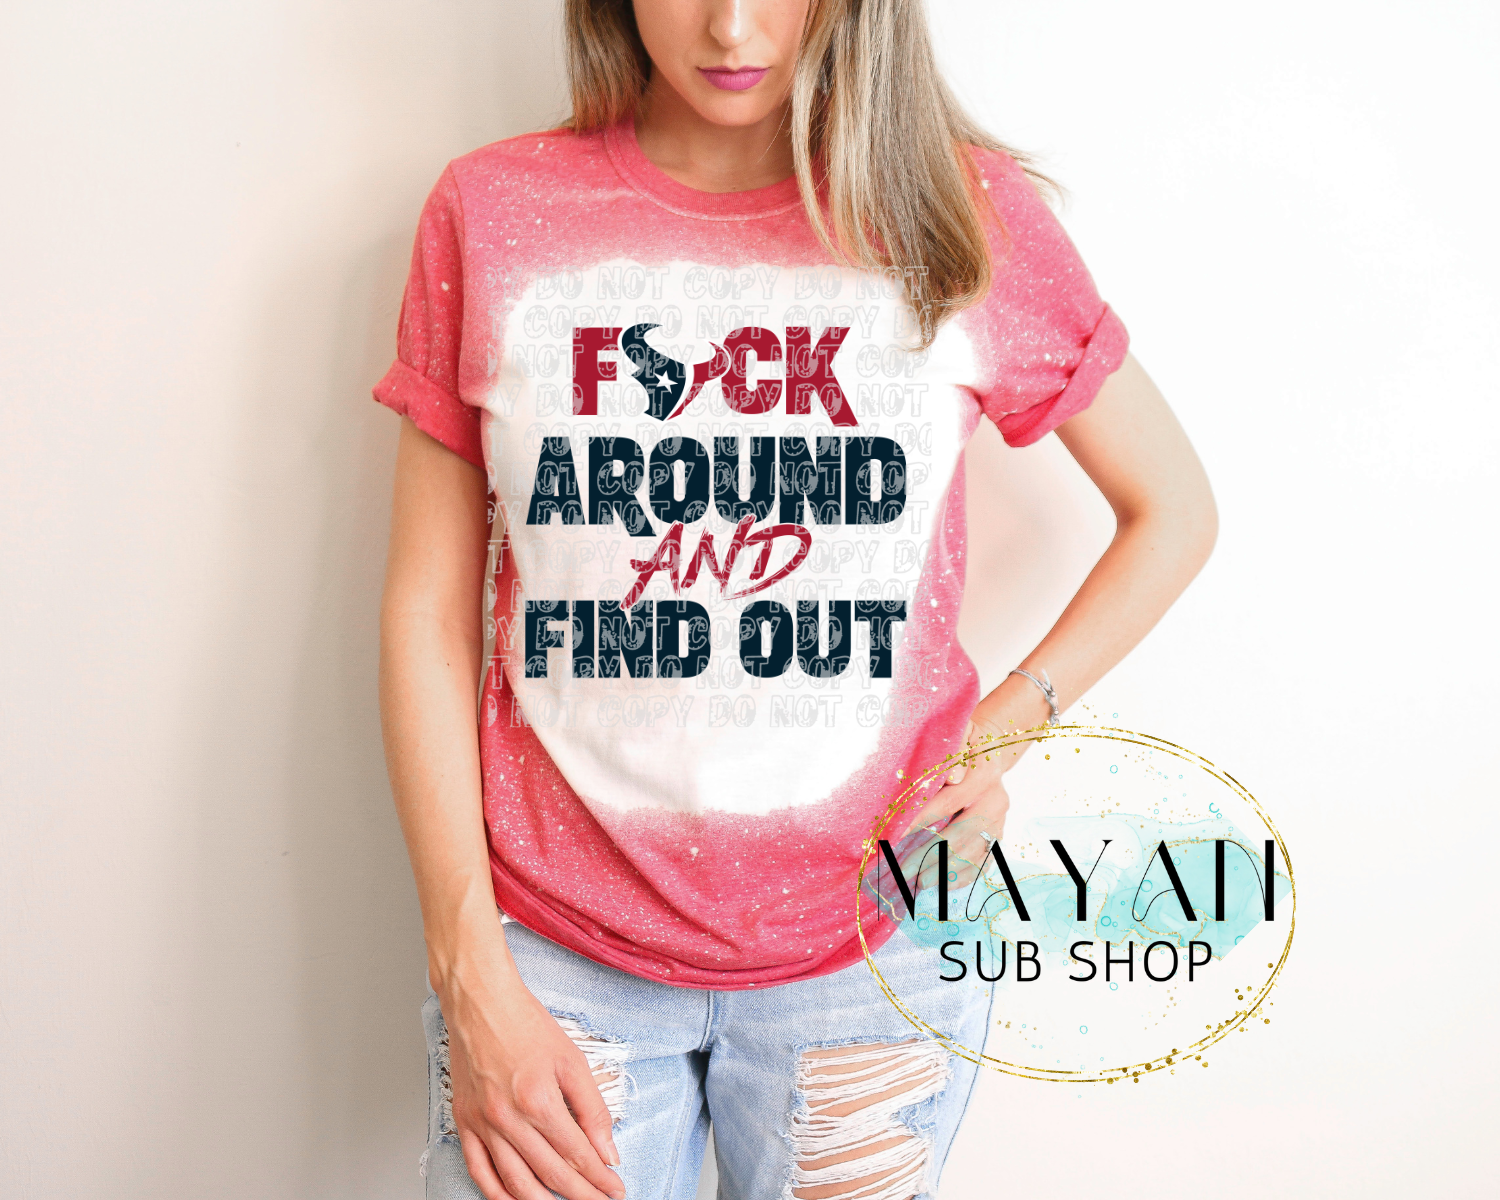 F*ck around and find out Houston Football in heather red bleached shirt. -Mayan Sub Shop